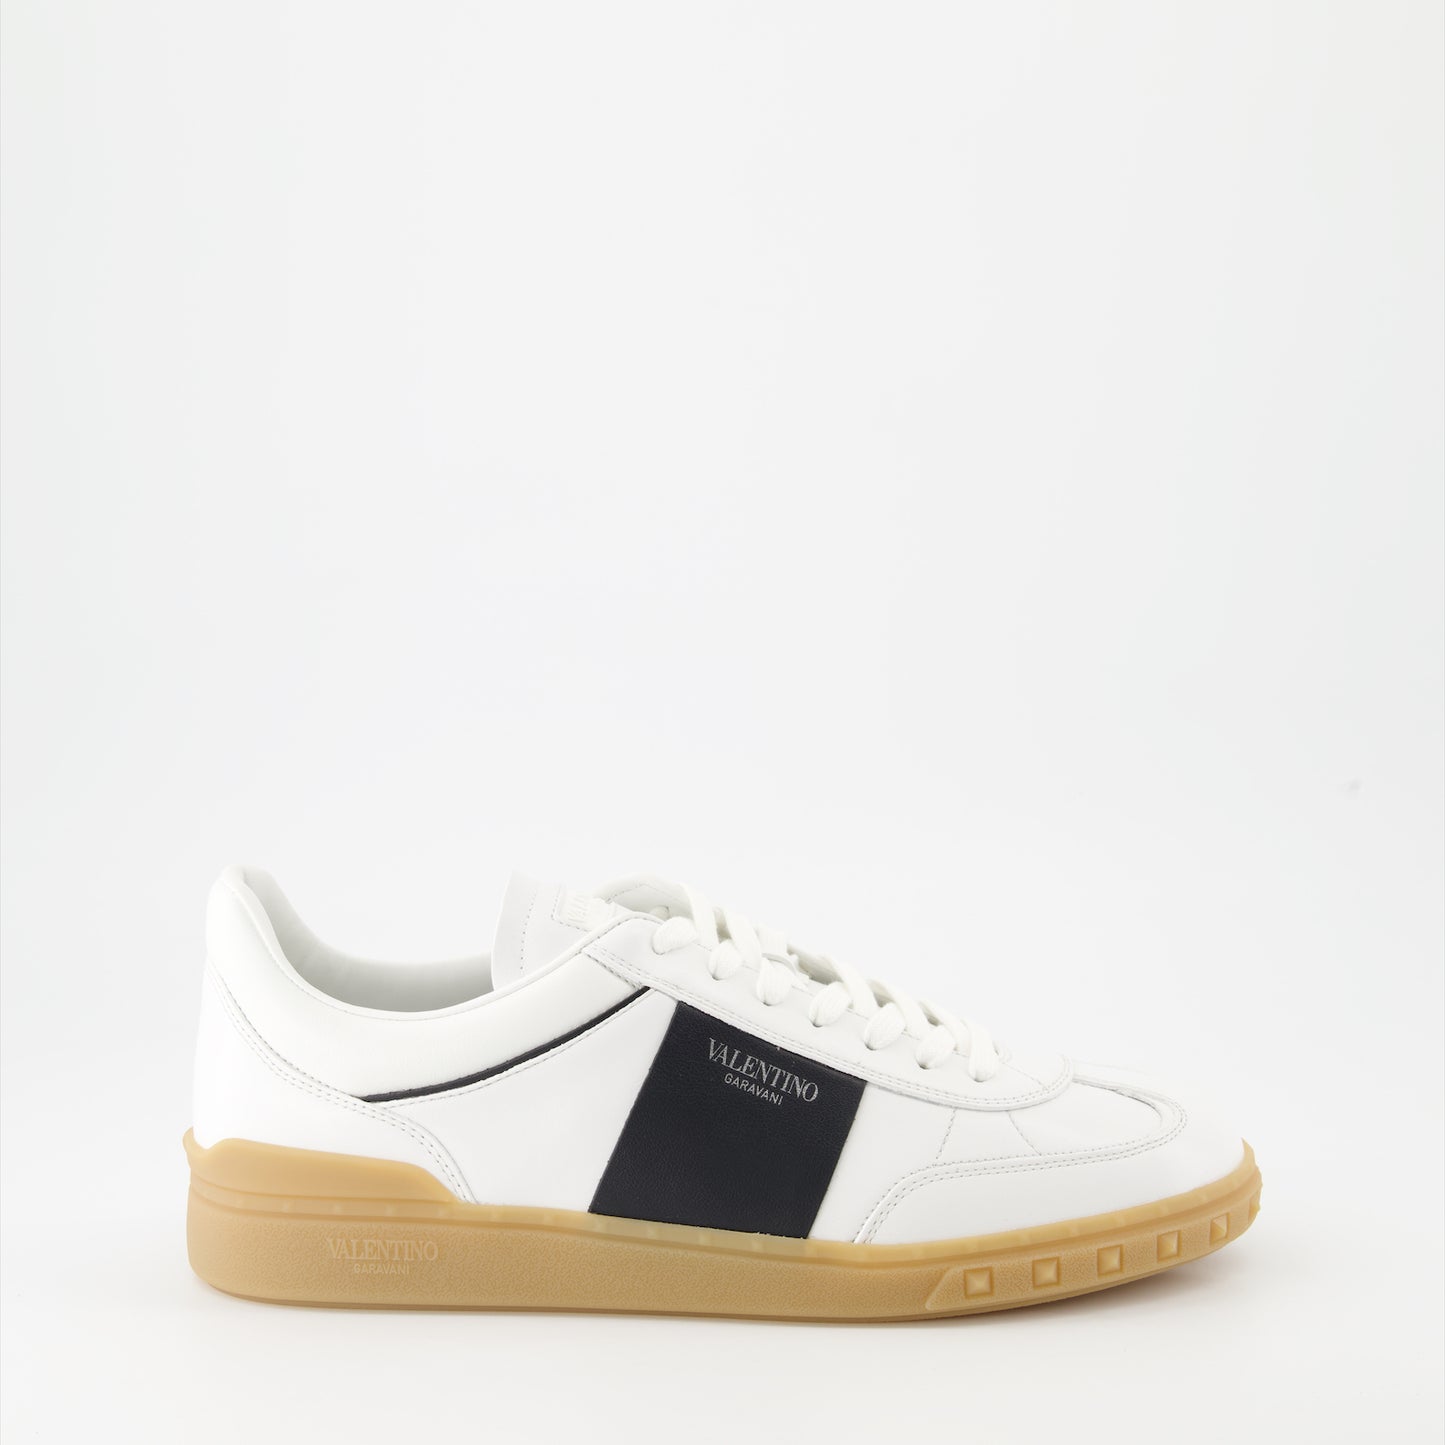 Upvillage sneakers in nappa leather